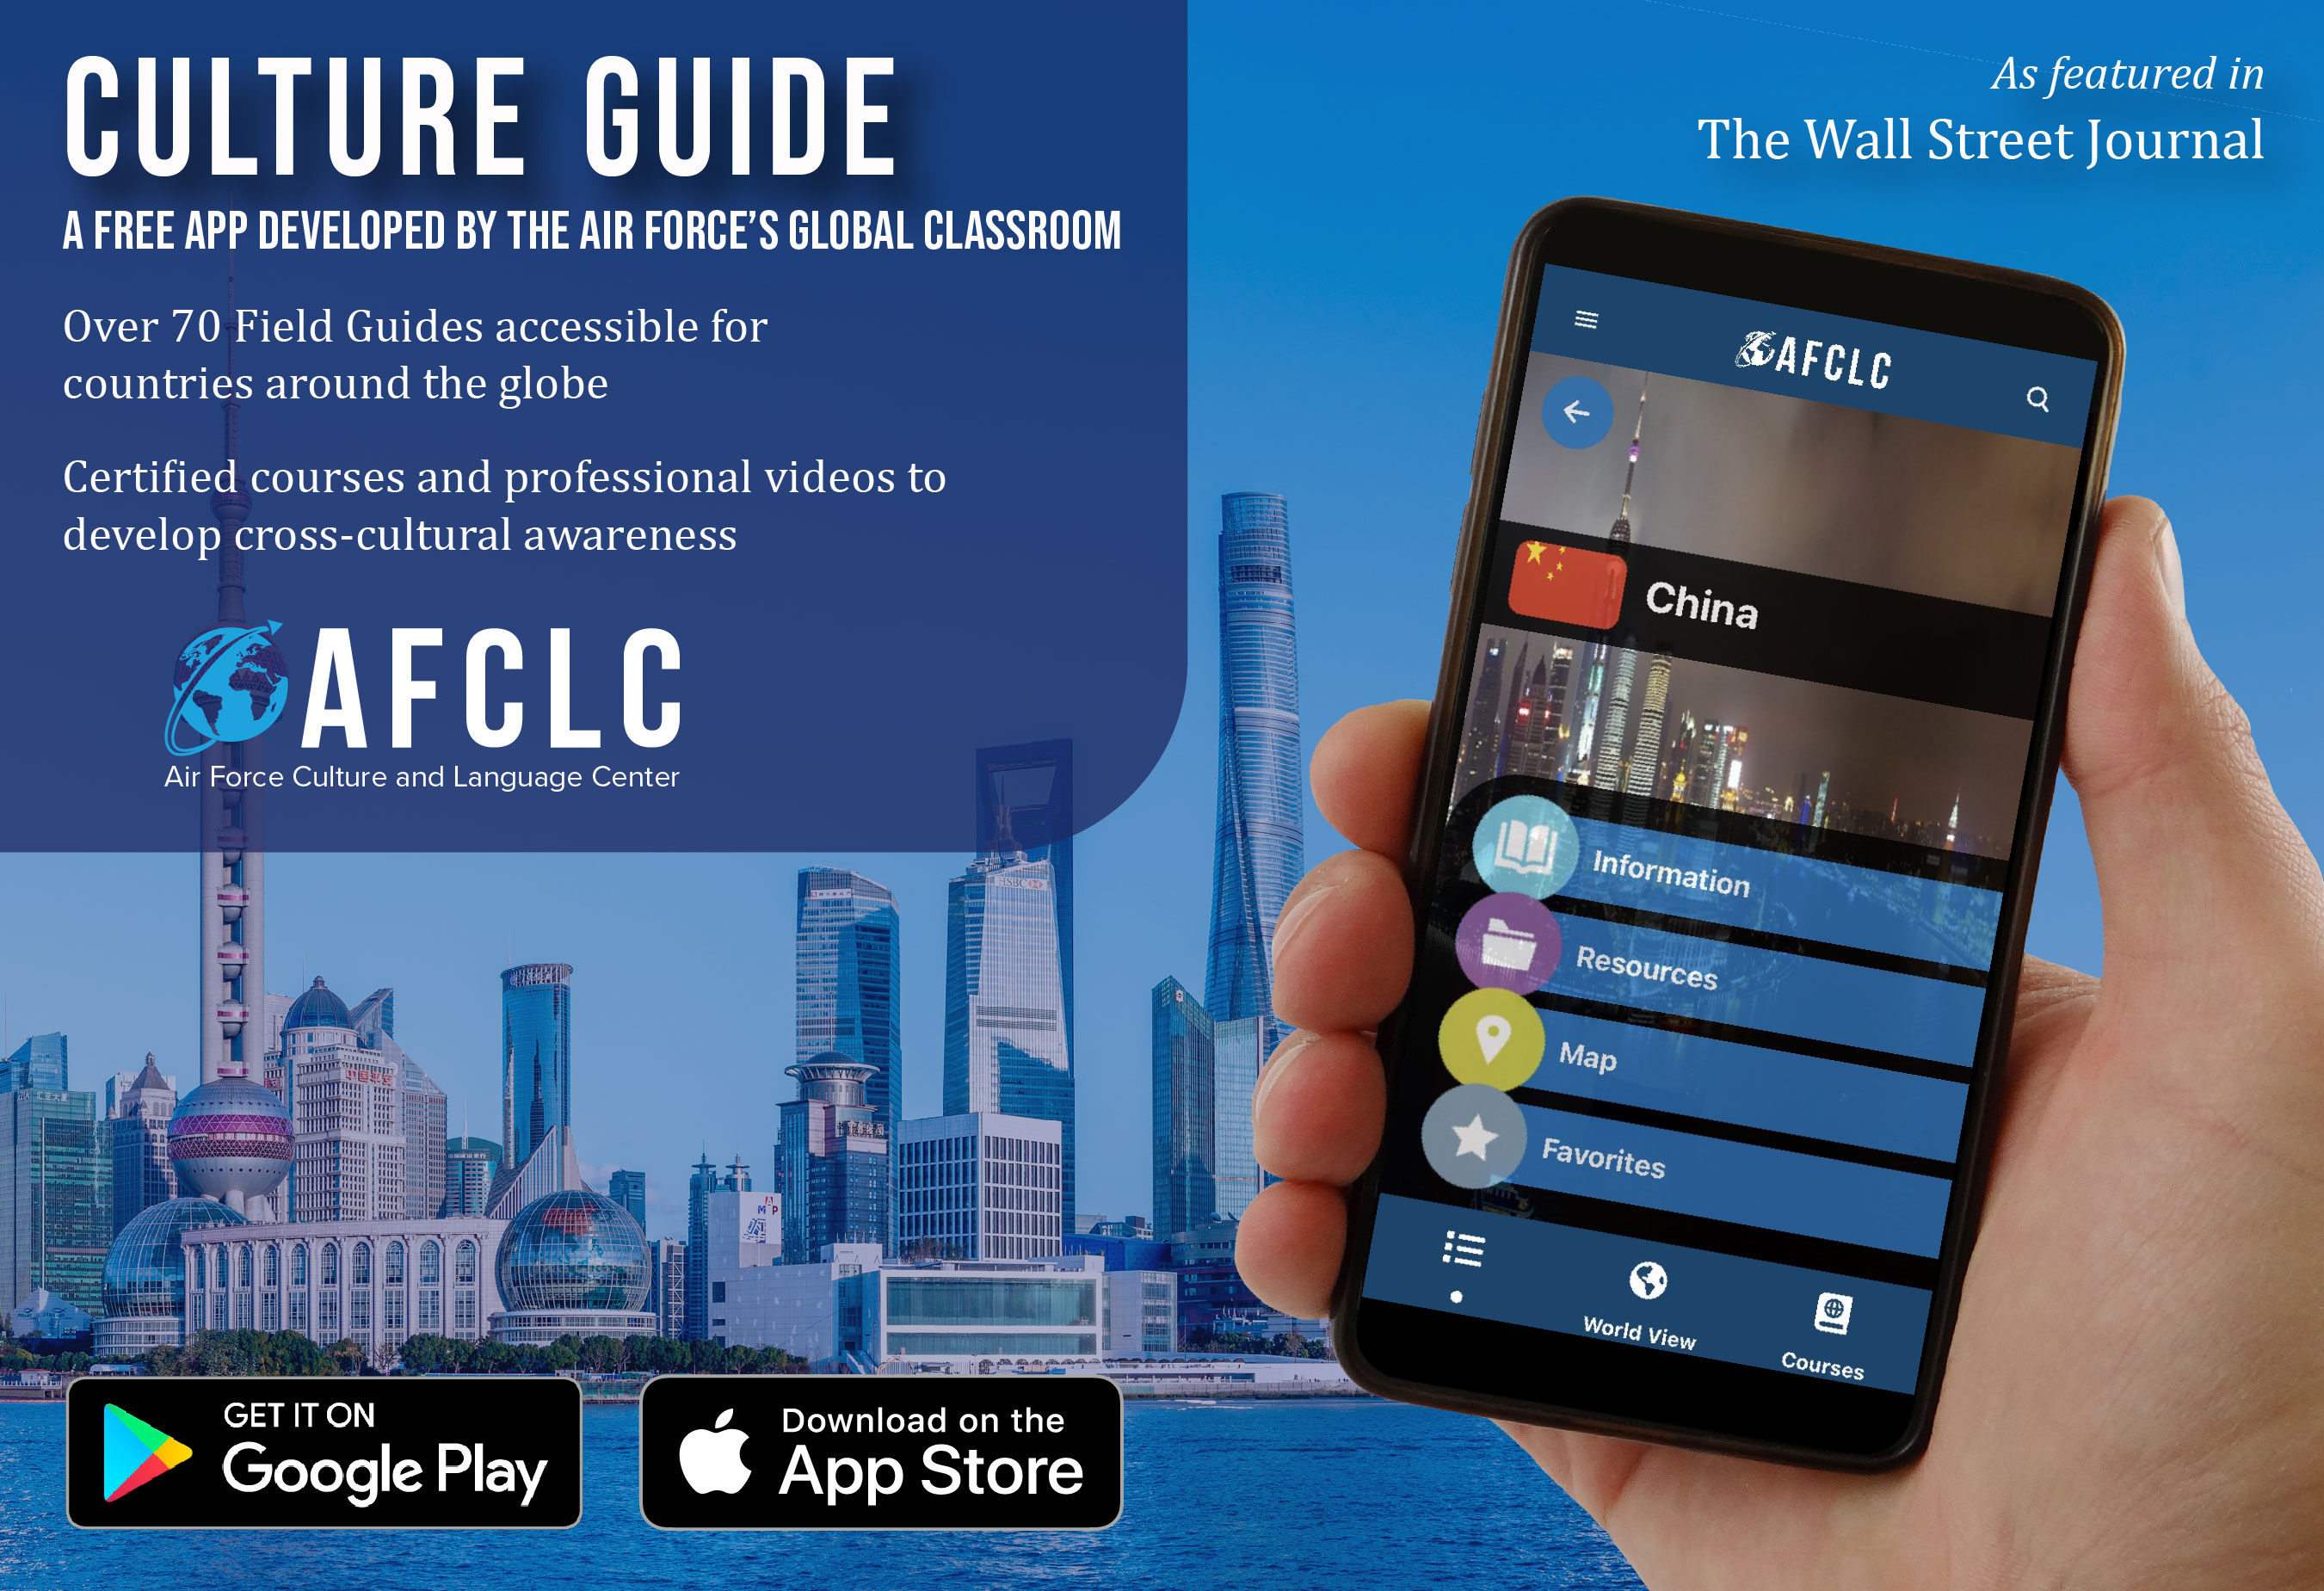 As featured in the Wall Street Journal: Culture Guide: A free app developed by the Air Force's Global Classroom. Over 70 Field Guides accessible for countries around the globe. Certified courses and professional videos to develop cross-cultural awareness. Get it on Google Play or download on the App Store.